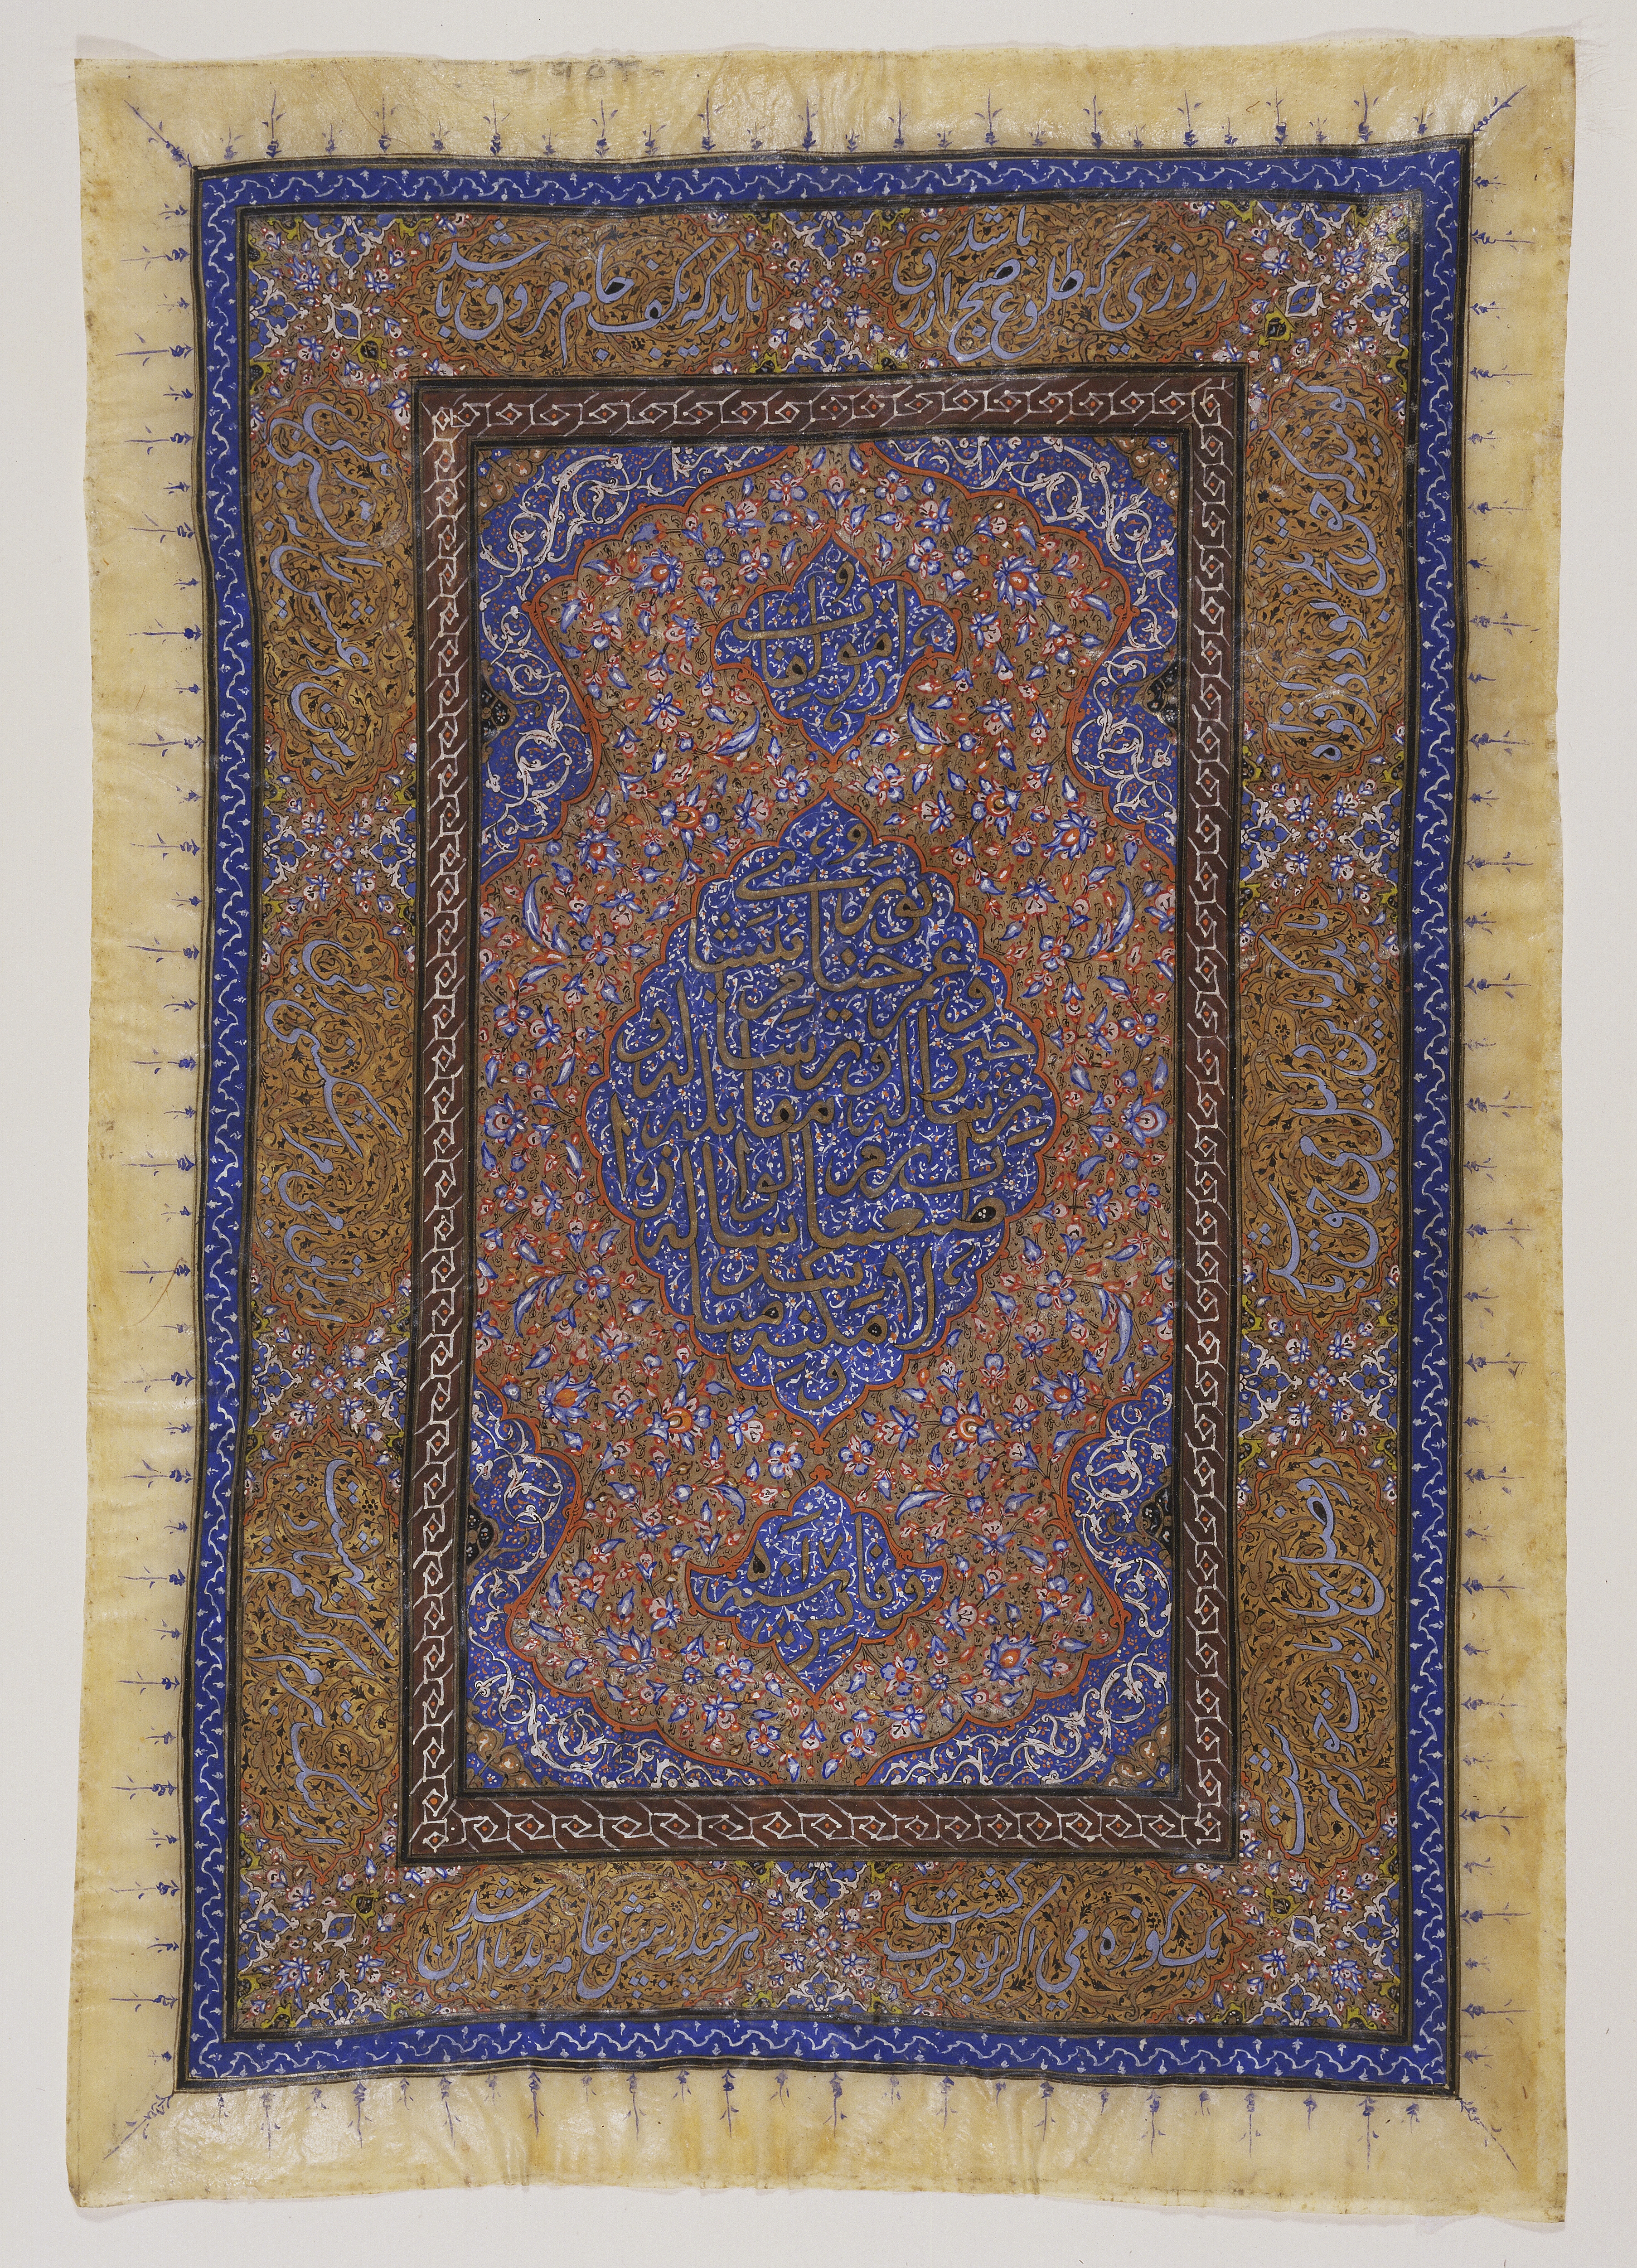 Maker: Unknown Culture: Iranian (Persian); Qajar Title: Illuminated Page with the Poetry of Omar Khayyam Date Made: 19th century Type: Drawing Materials: opaque water base colors and gold on parchment Place Made: Iran (Persia) Measurements: Sheet: 11 x 7 1/2 in.; 27.94 x 19.05 cm Credit Line: Gift of Mrs. Evan M. Wilson (Leila Fosburgh, class of 1934) Accession Number: 1990:2-23 Collection: Smith College Museum of Art